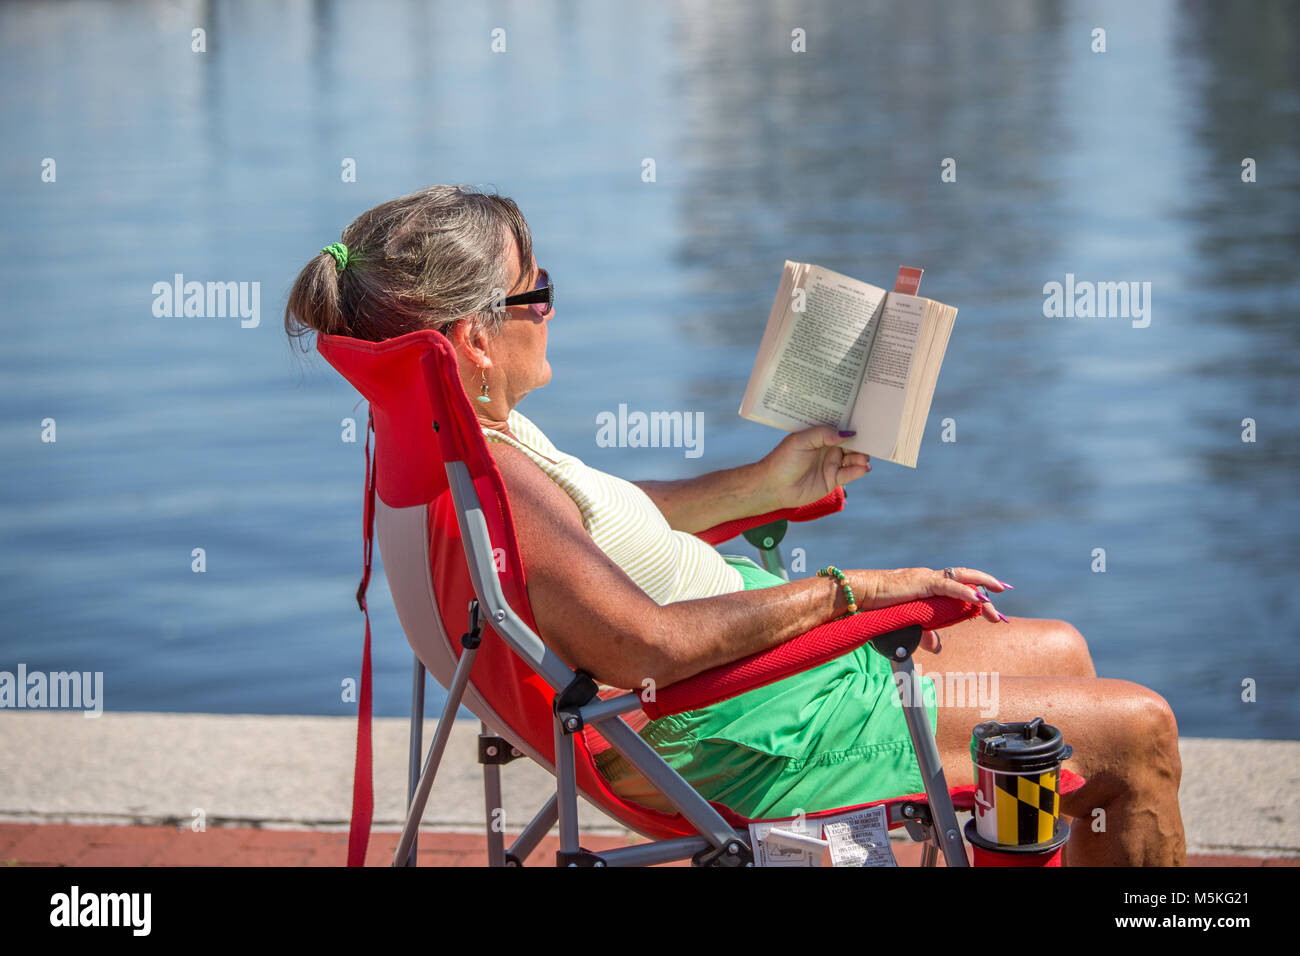 Middle aged woman relaxes in beach chair next to the water as she reads a book, Baltimore, Maryland. Stock Photo